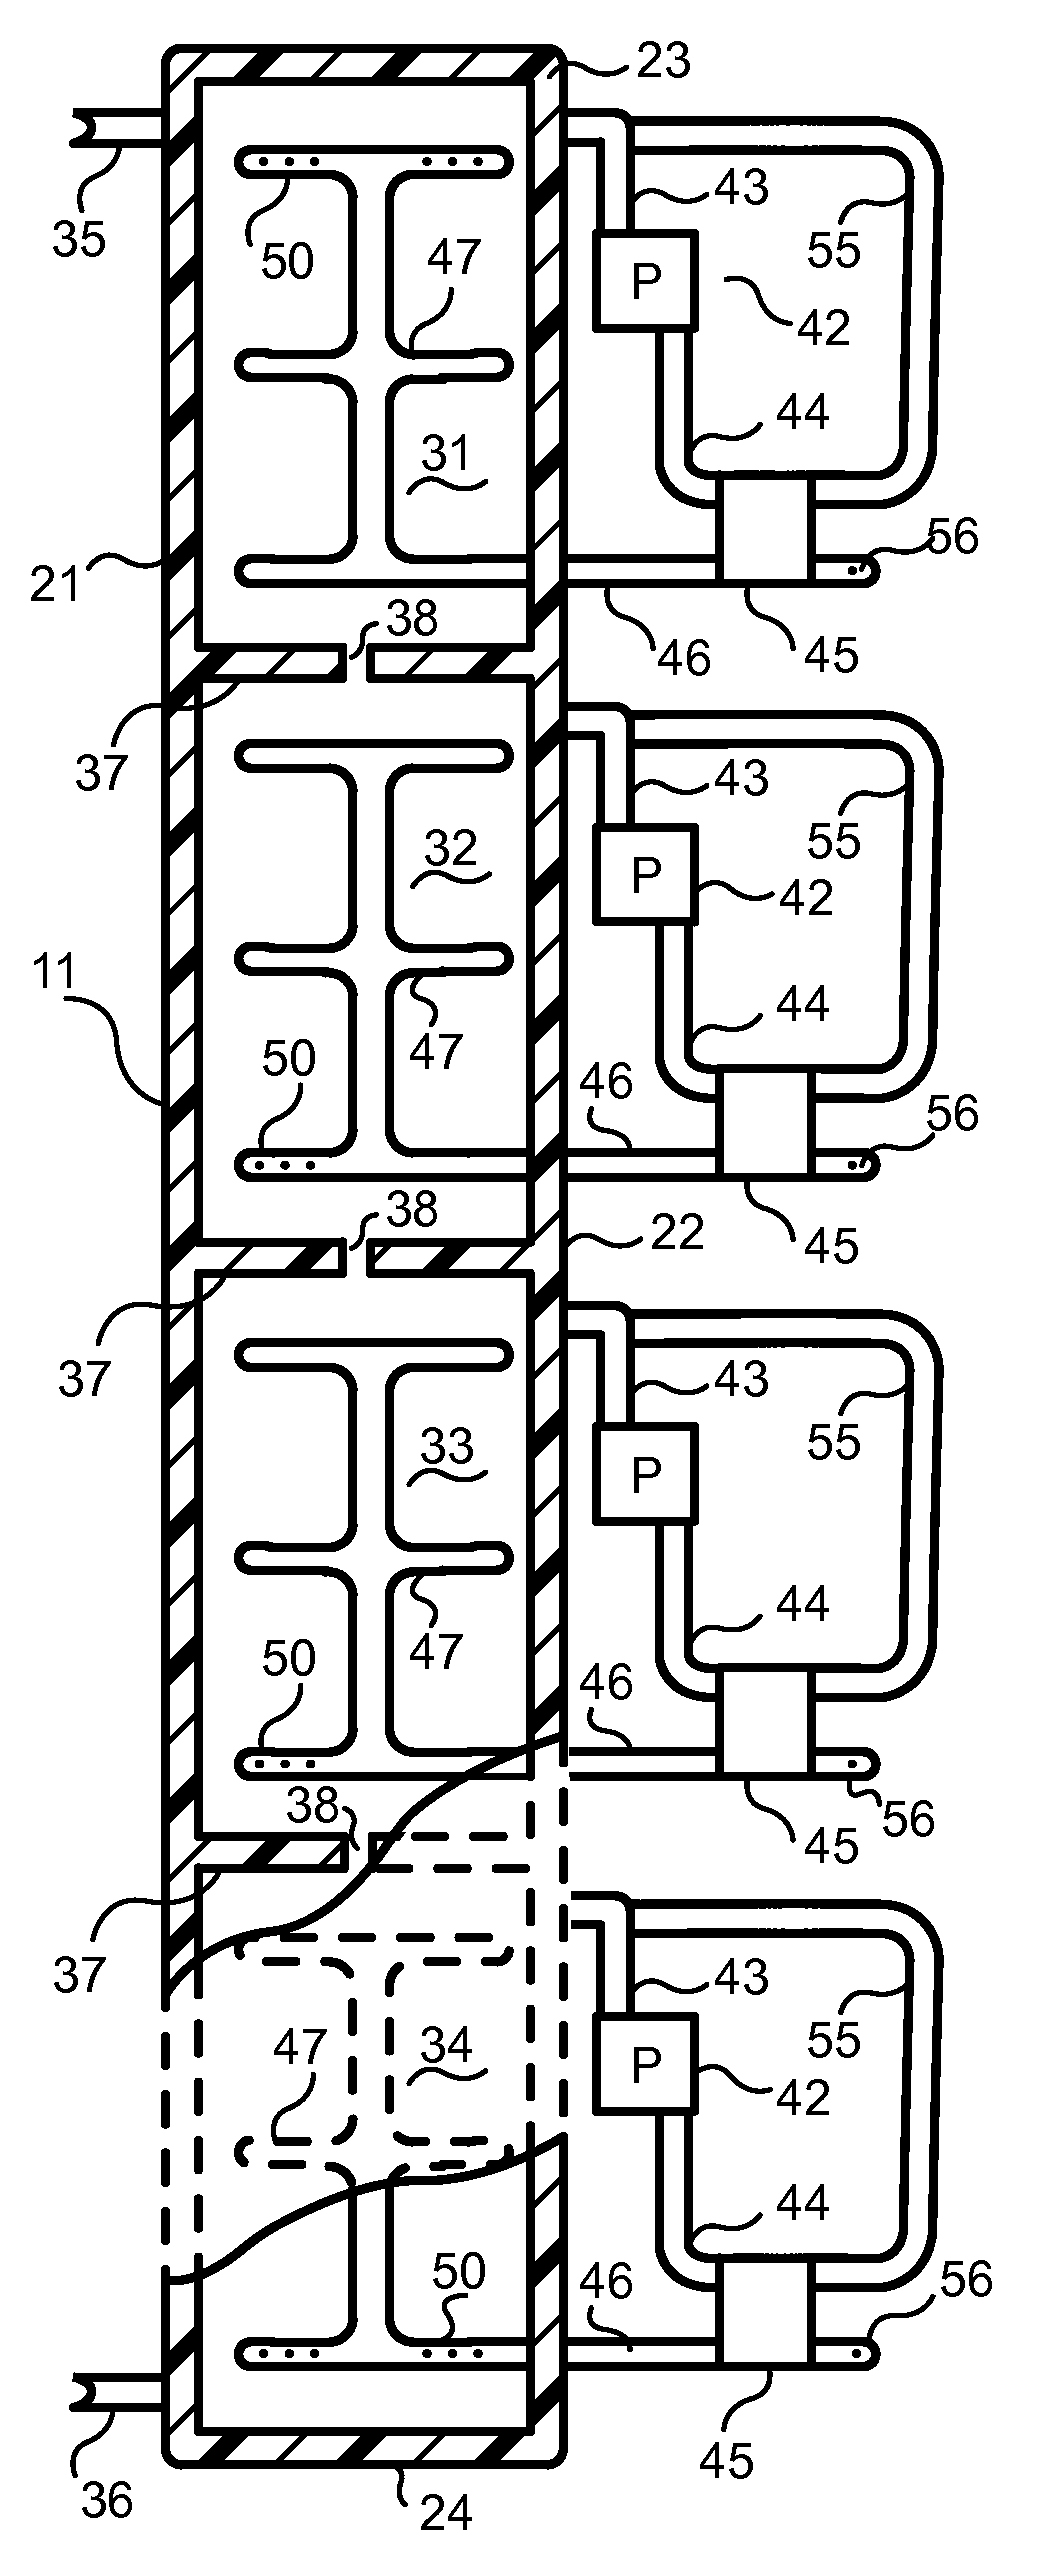 Air energy reduction method and apparatus using waste heat from condensers or other low grade heat